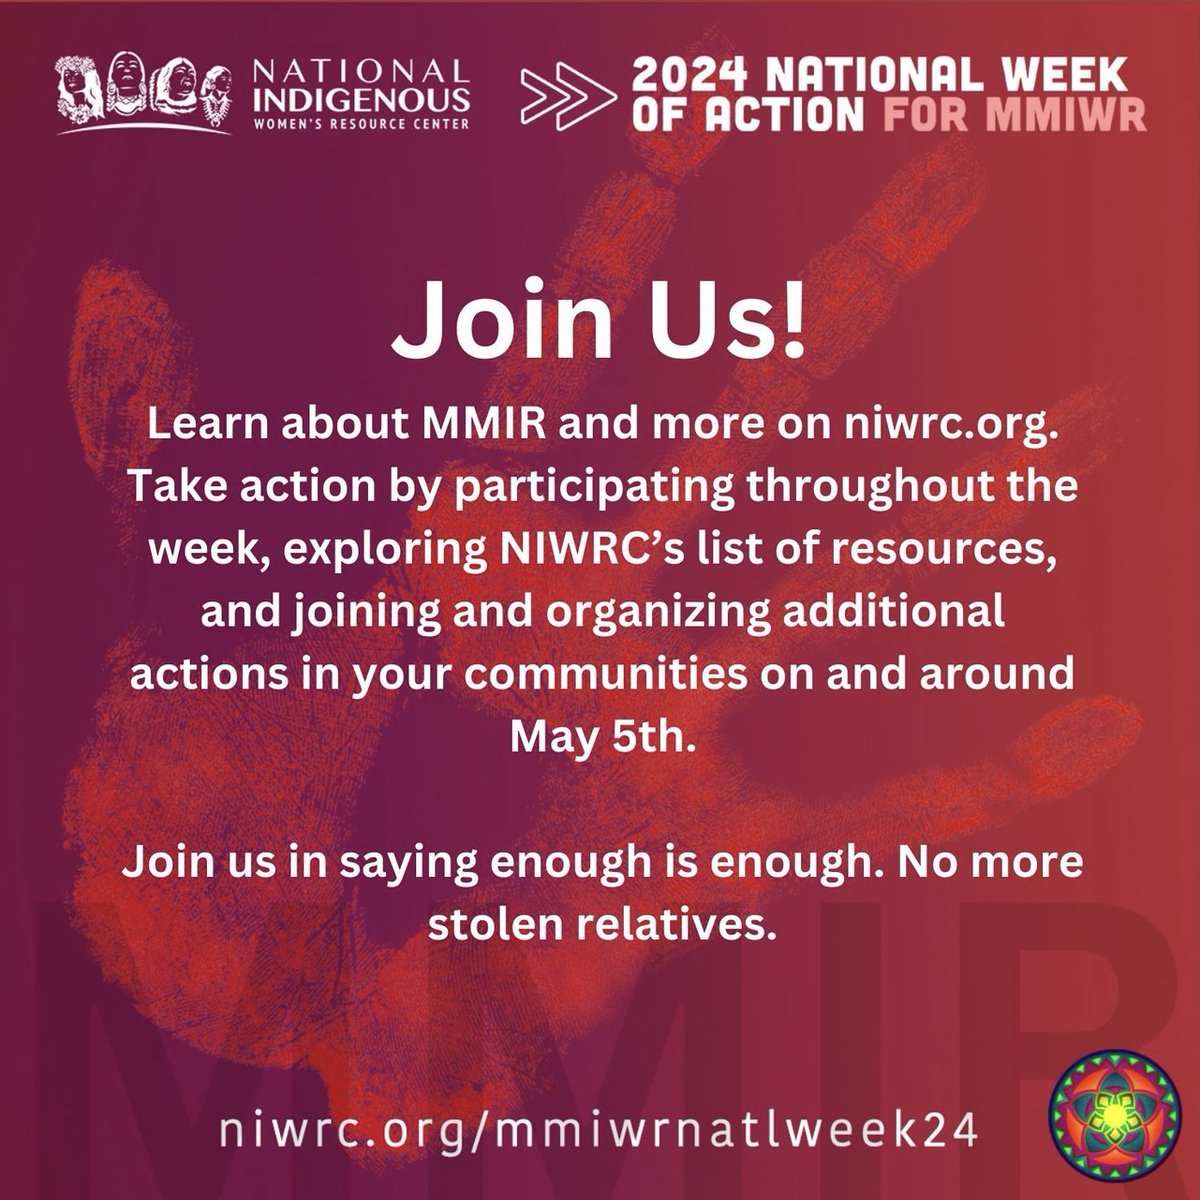 REPOST @indigenouspridela @niwrc

April 29 - May 5, 2024, is the National Week of Action for Missing and Murdered Indigenous Women and Relatives (MMIWR). 

#MMIWR #MMIWRActionNow #NoMoreStolenSisters